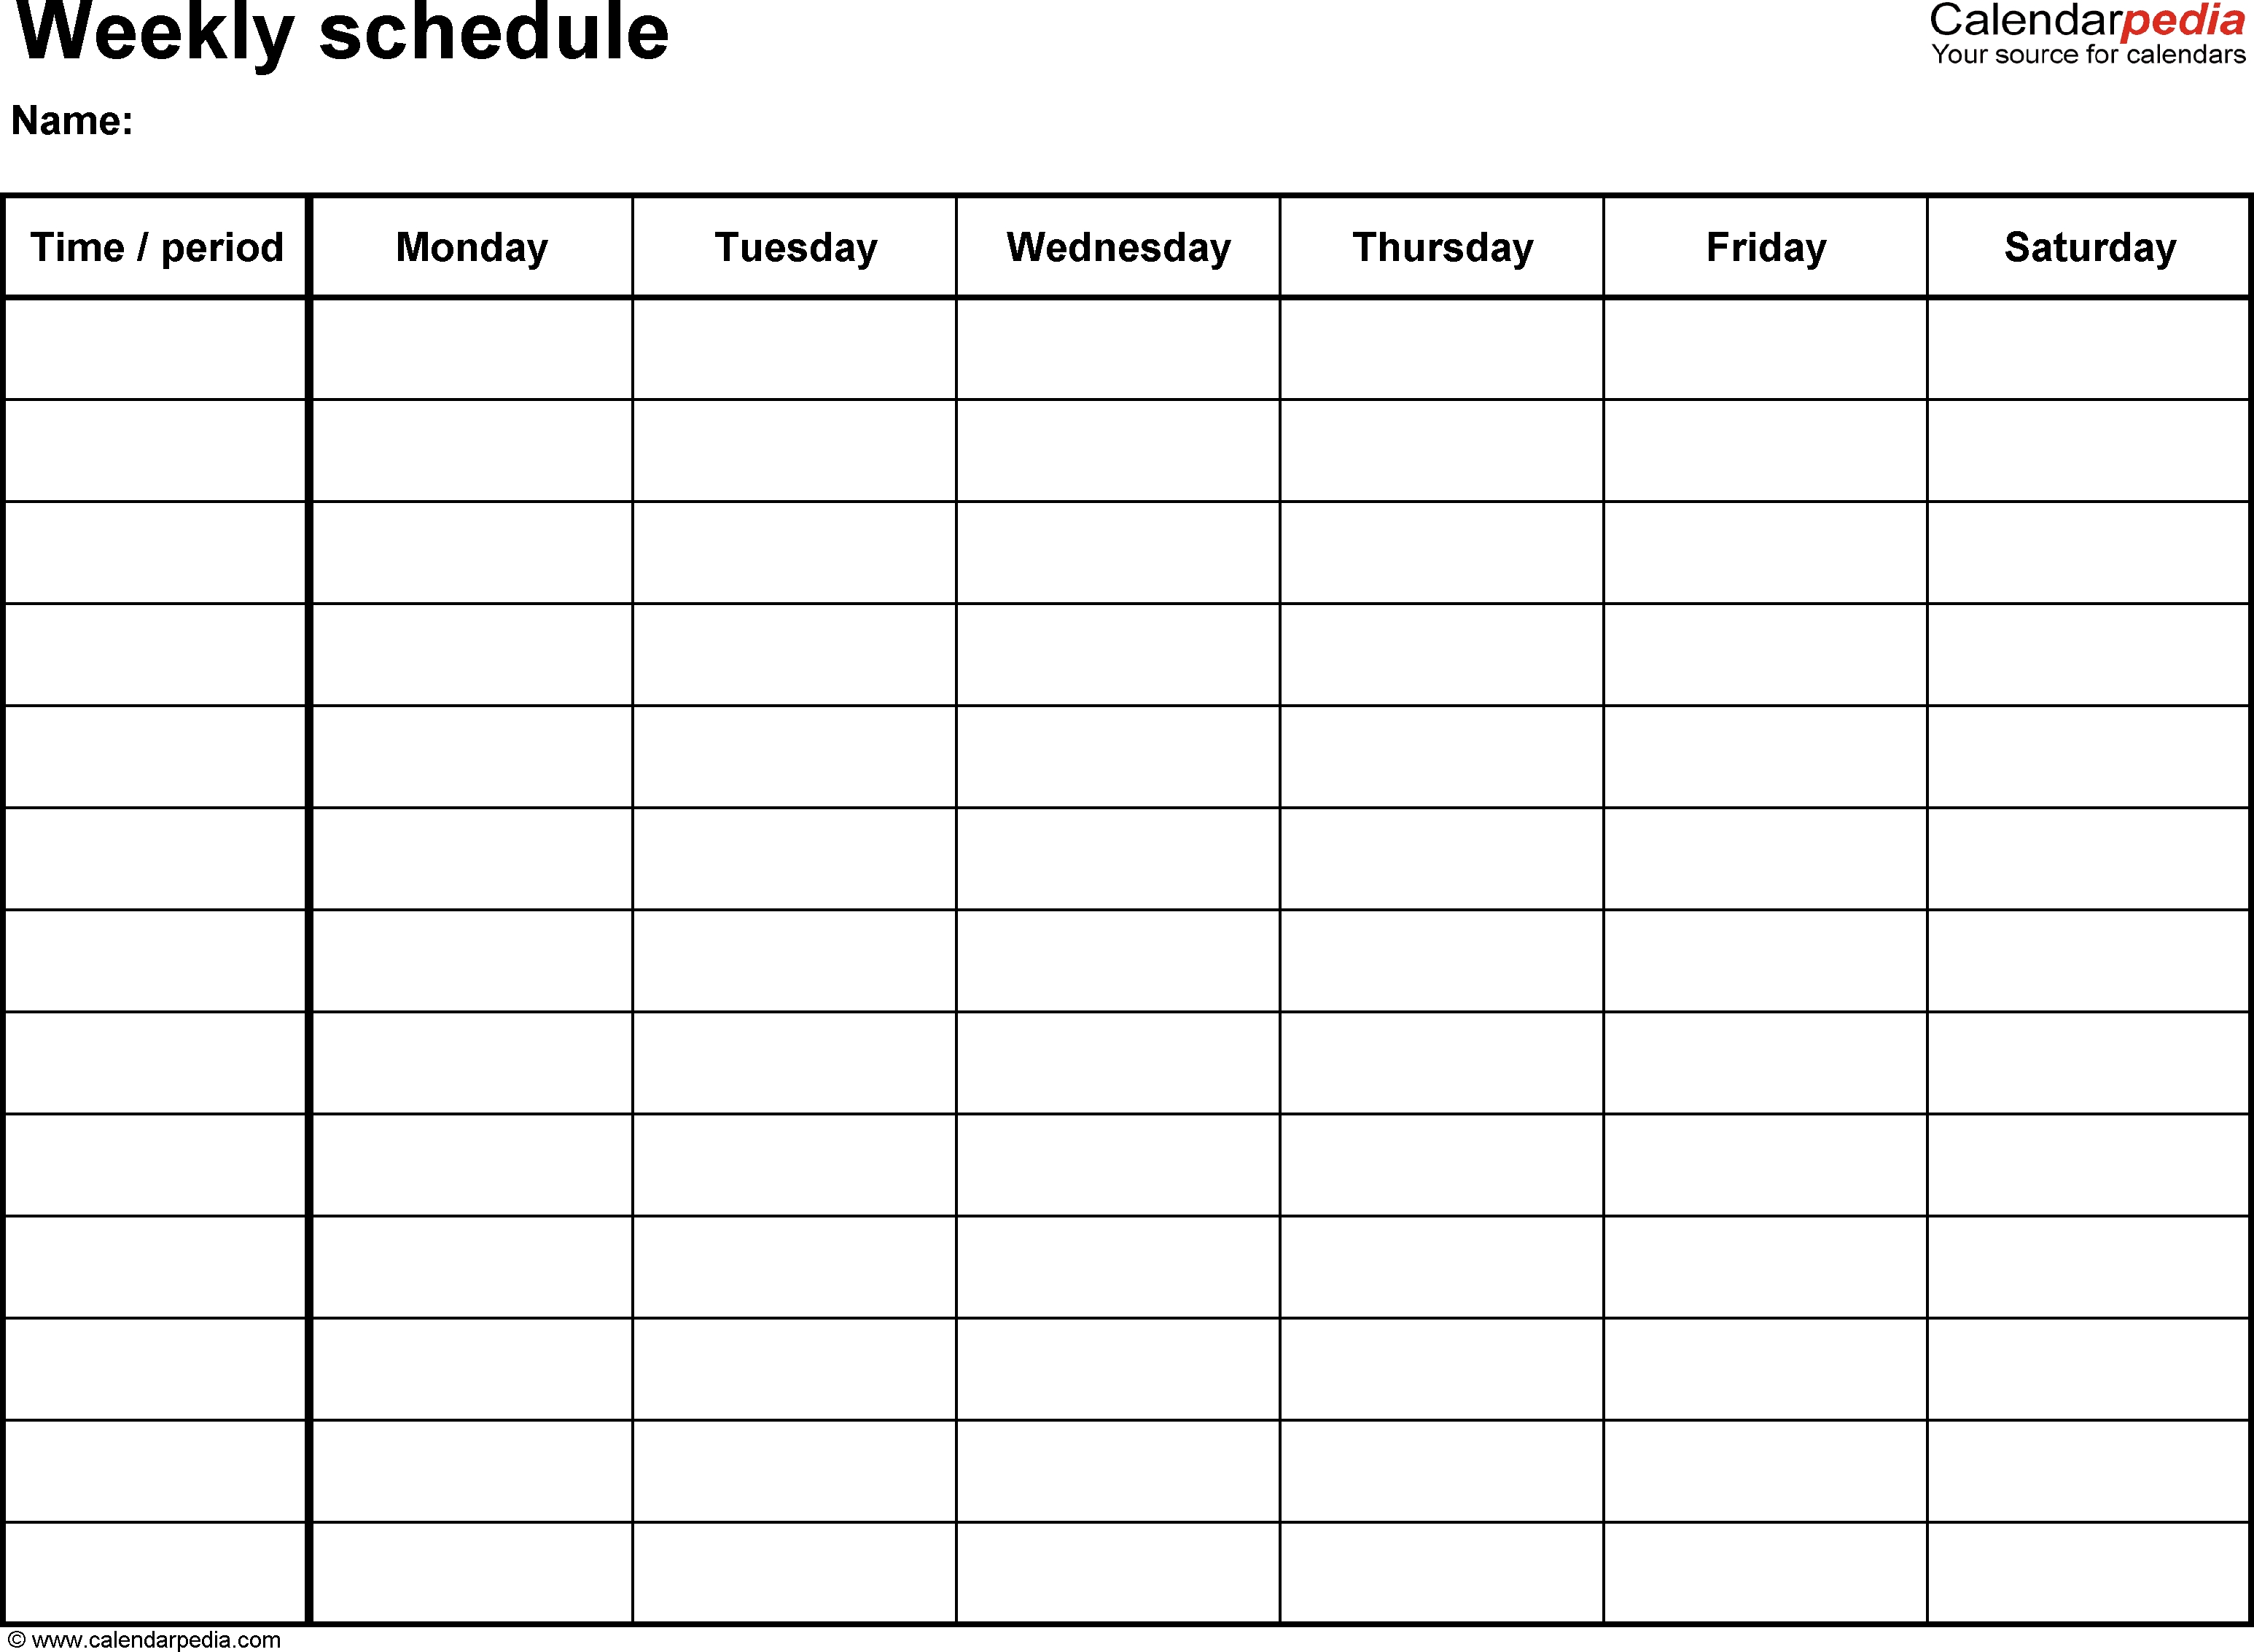 Free Weekly Schedule Templates For Pdf - 18 Templates-Monthly Calendar Printable No Dates